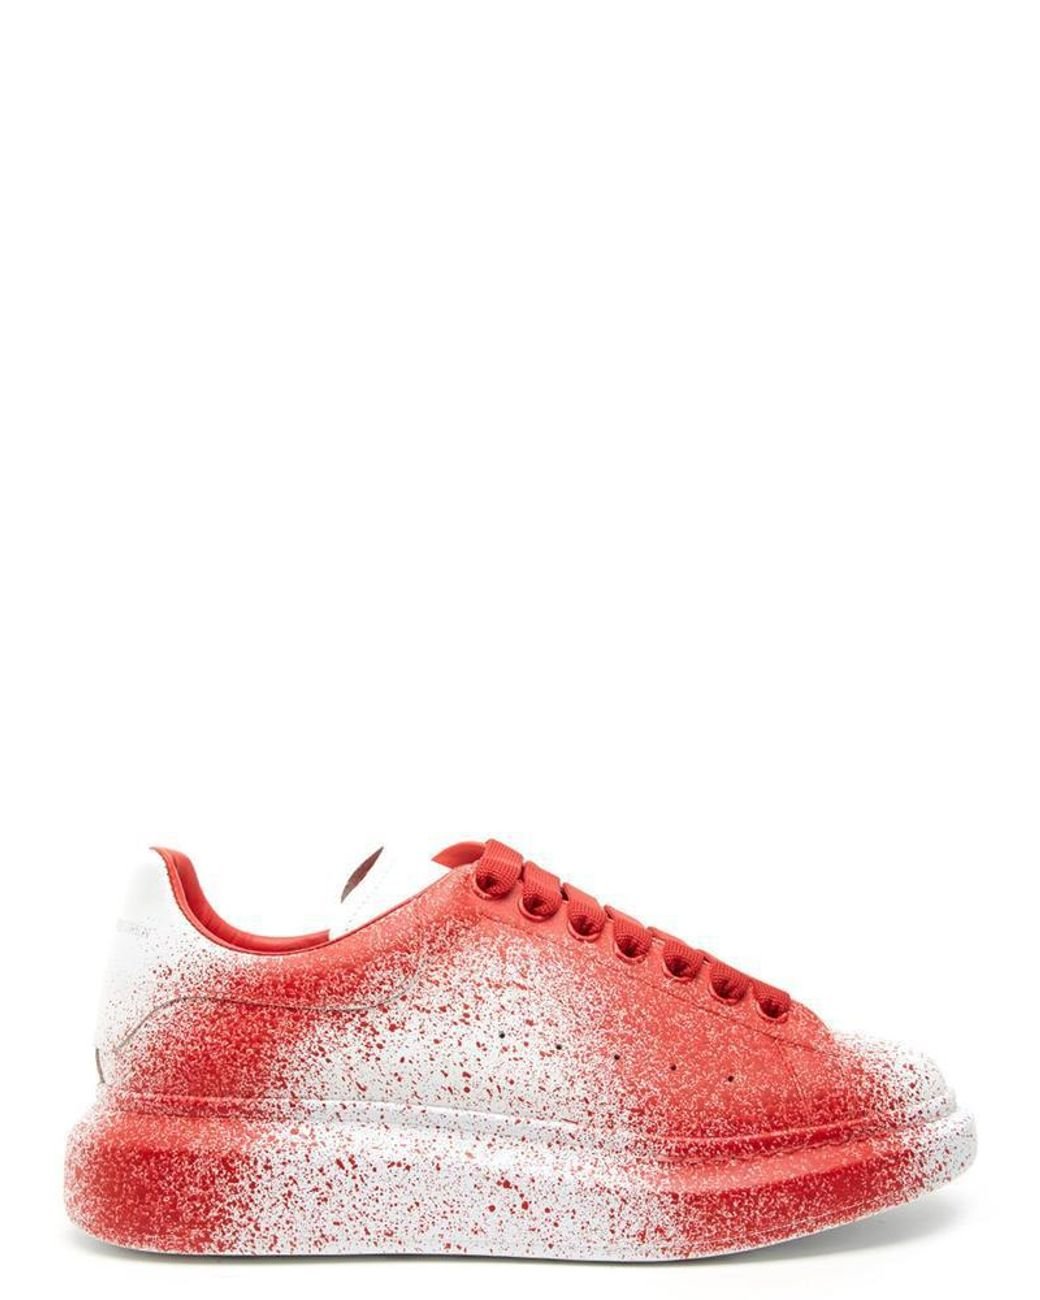 Alexander McQueen Leather Spray Paint Sneakers in Red | Lyst